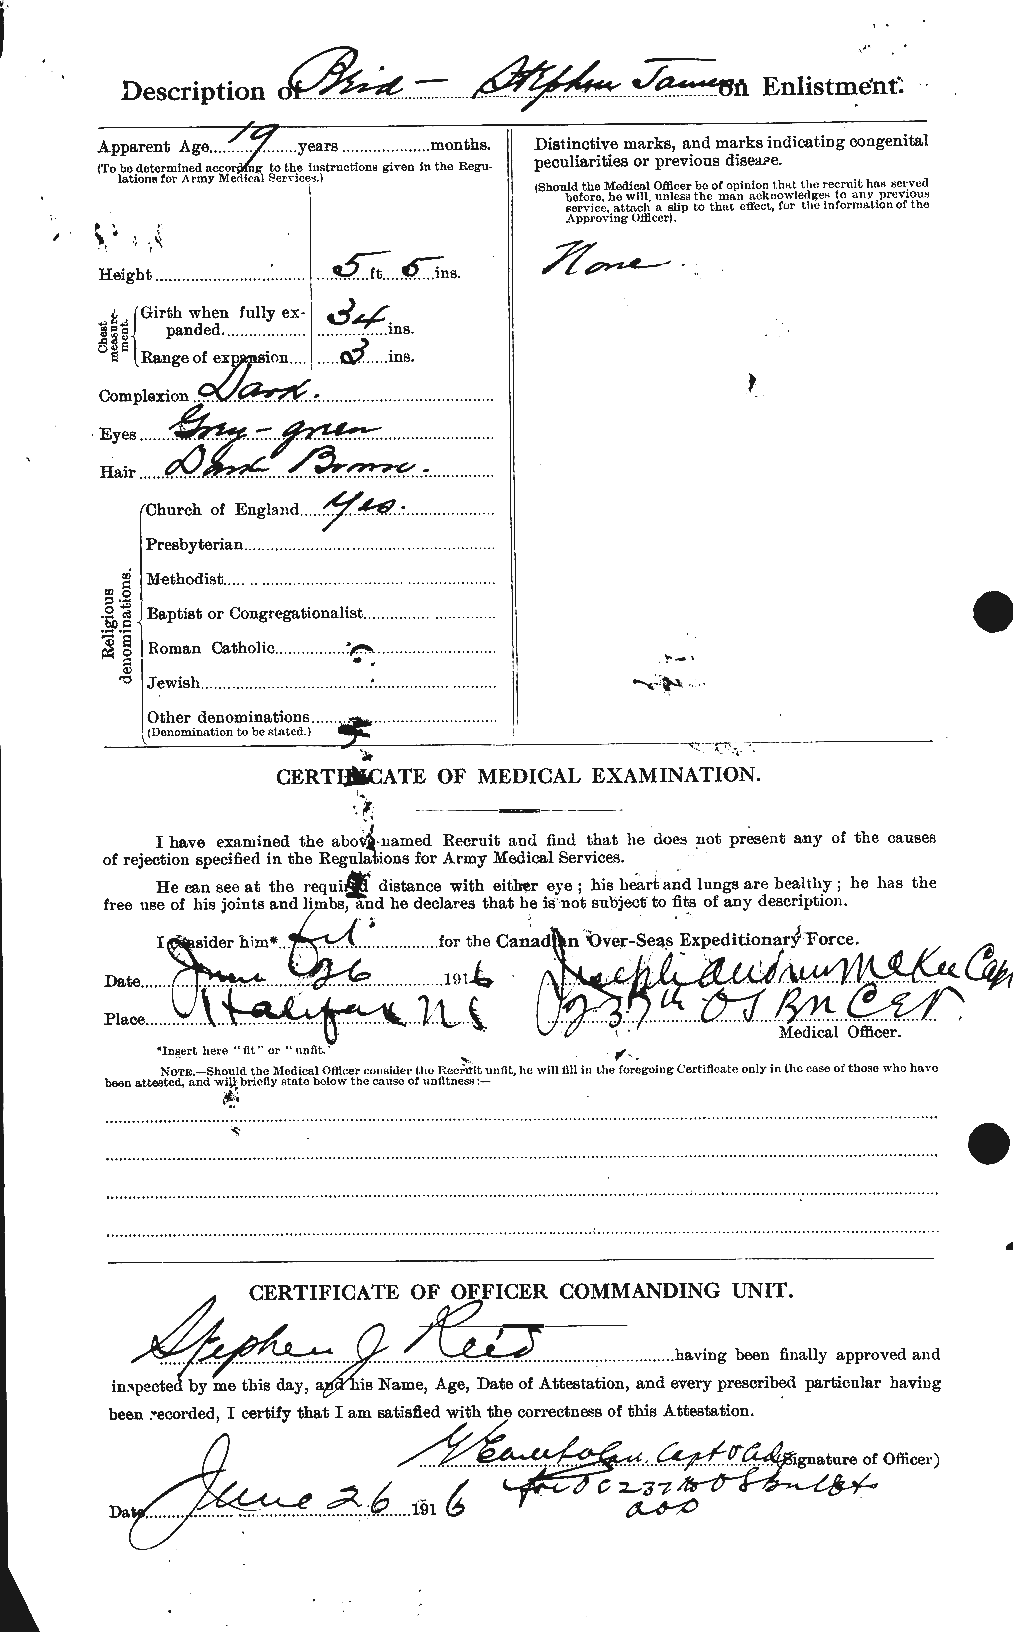 Personnel Records of the First World War - CEF 601973b